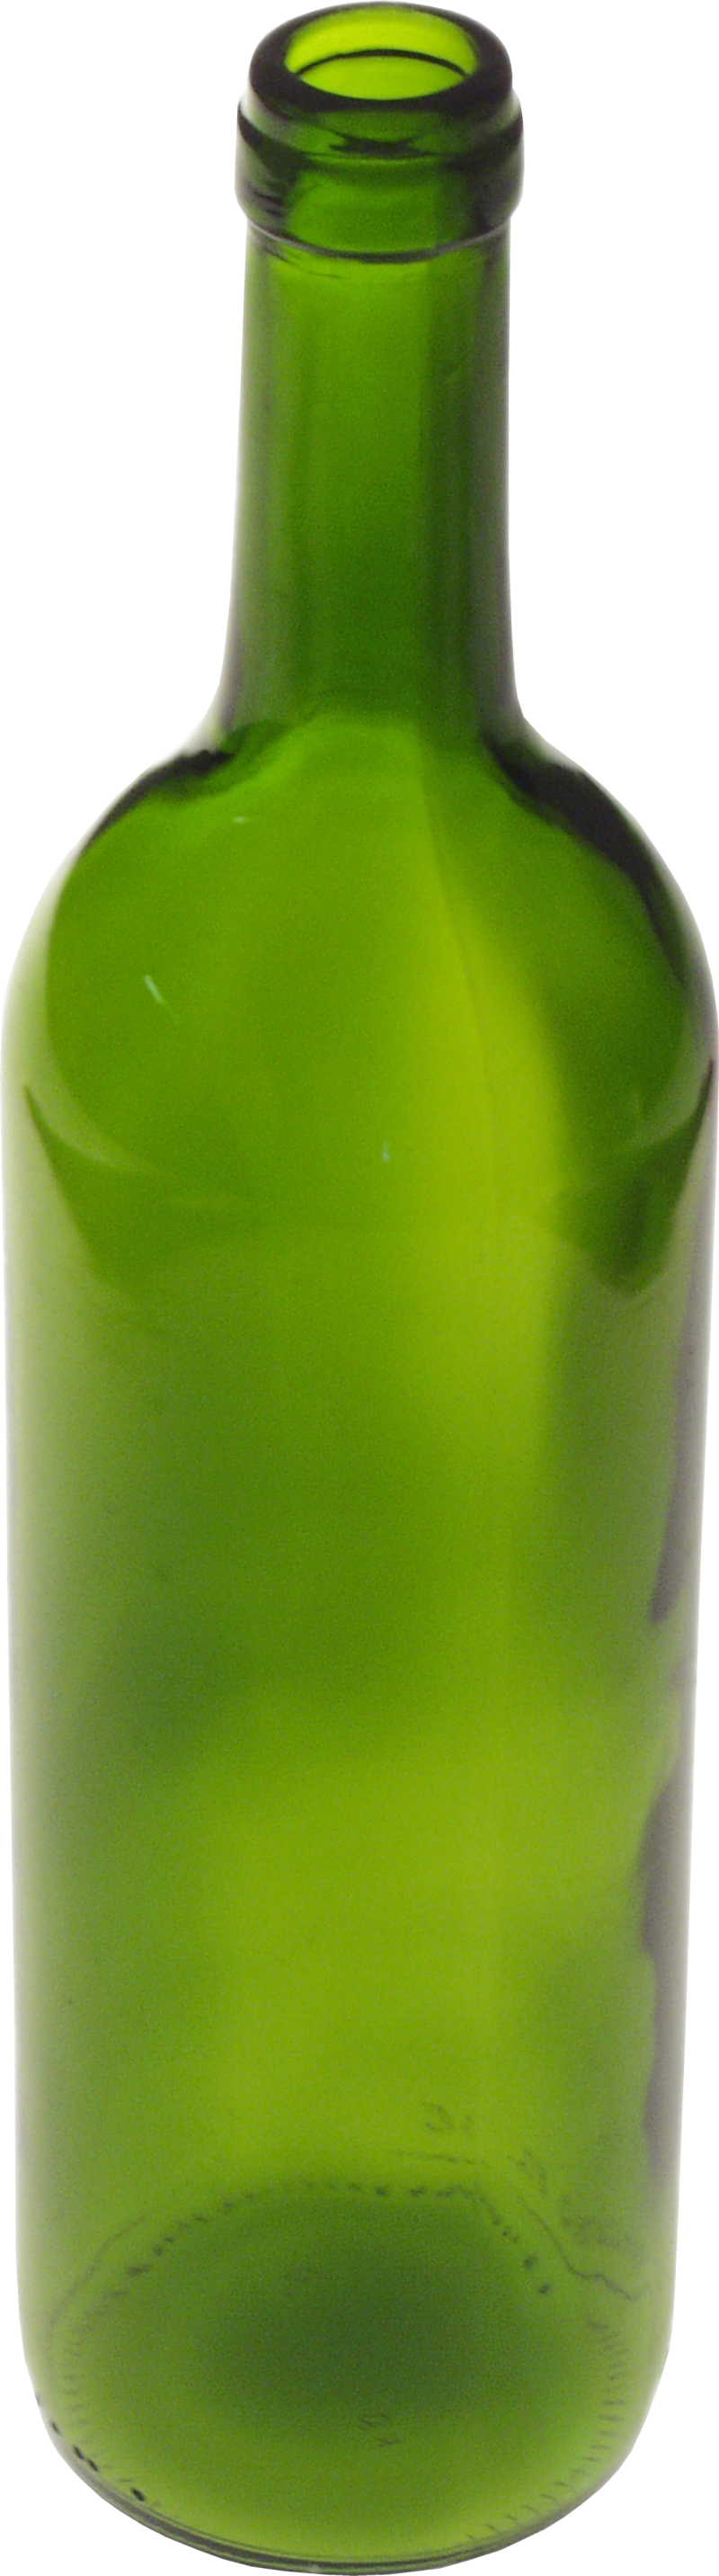 Empty Bottle PNG Image - PurePNG | Free transparent CC0 PNG Image Library